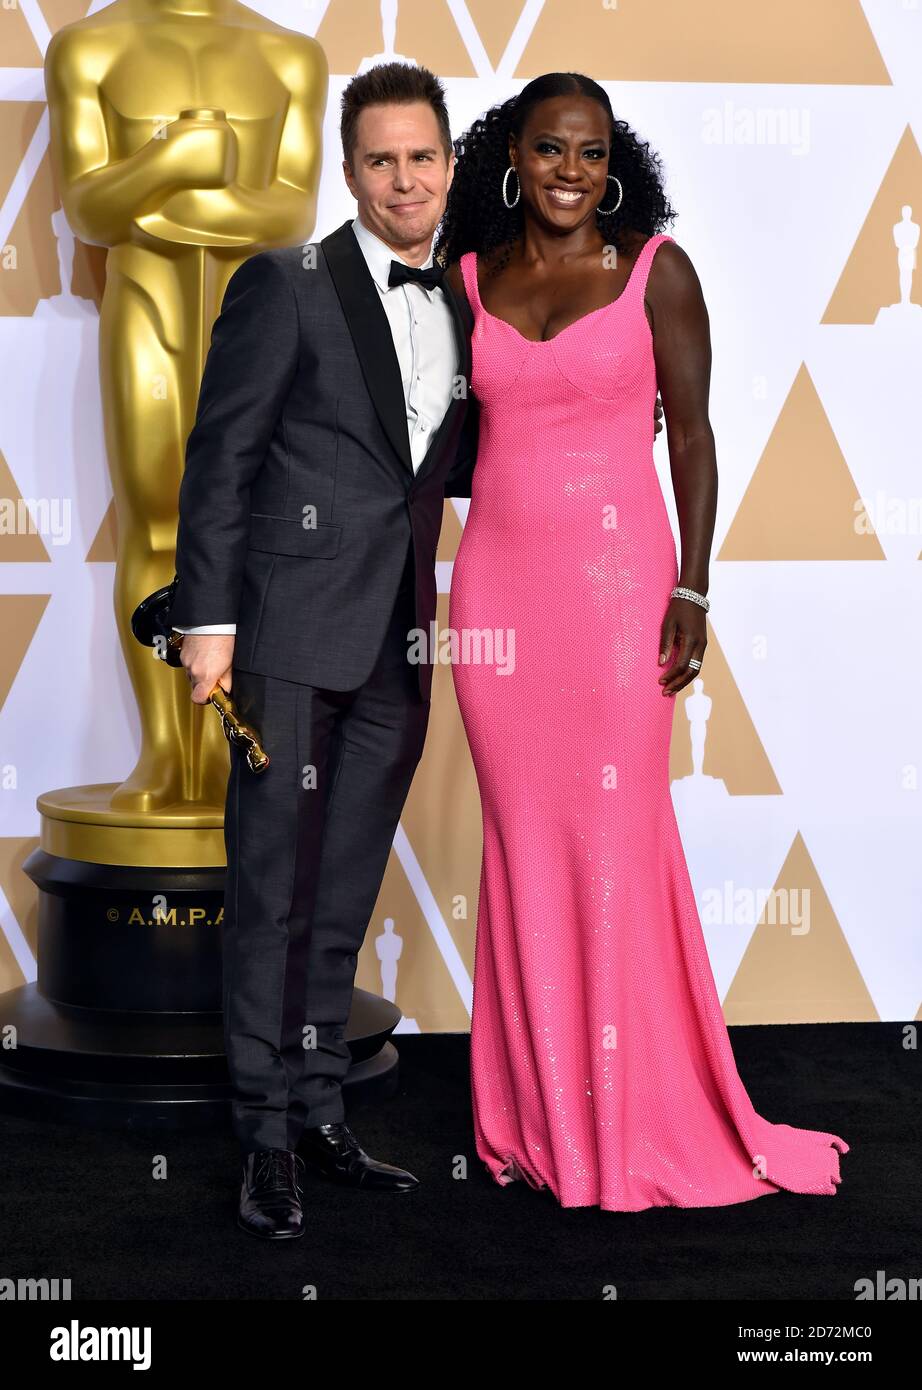 Sam Rockwell with his best supporting actor Oscar for Three Billboards Outside Ebbing, Missouri alongside Viola Davis in the press room at the 90th Academy Awards held at the Dolby Theatre in Hollywood, Los Angeles, USA.Â Photo credit should read: Matt Crossick/EMPICS Entertainment Stock Photo